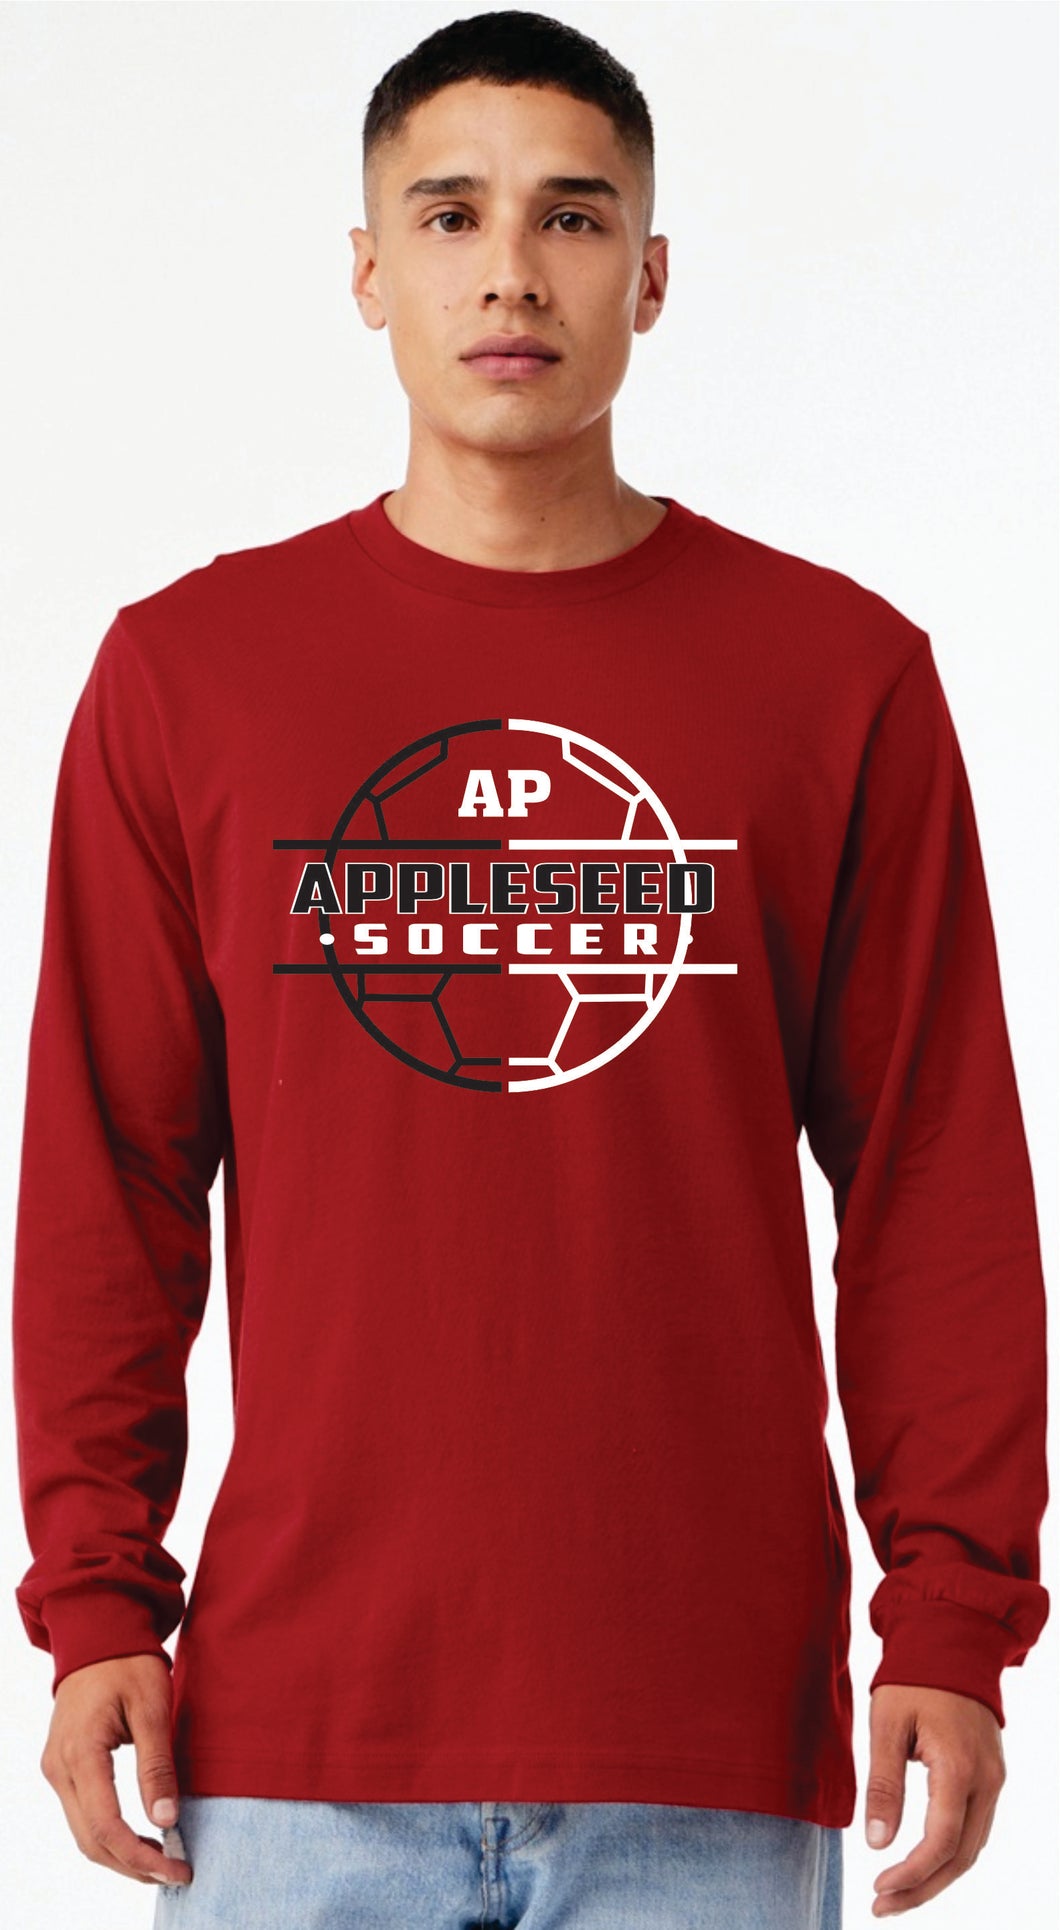 AP black and white Long Sleeved Shirts